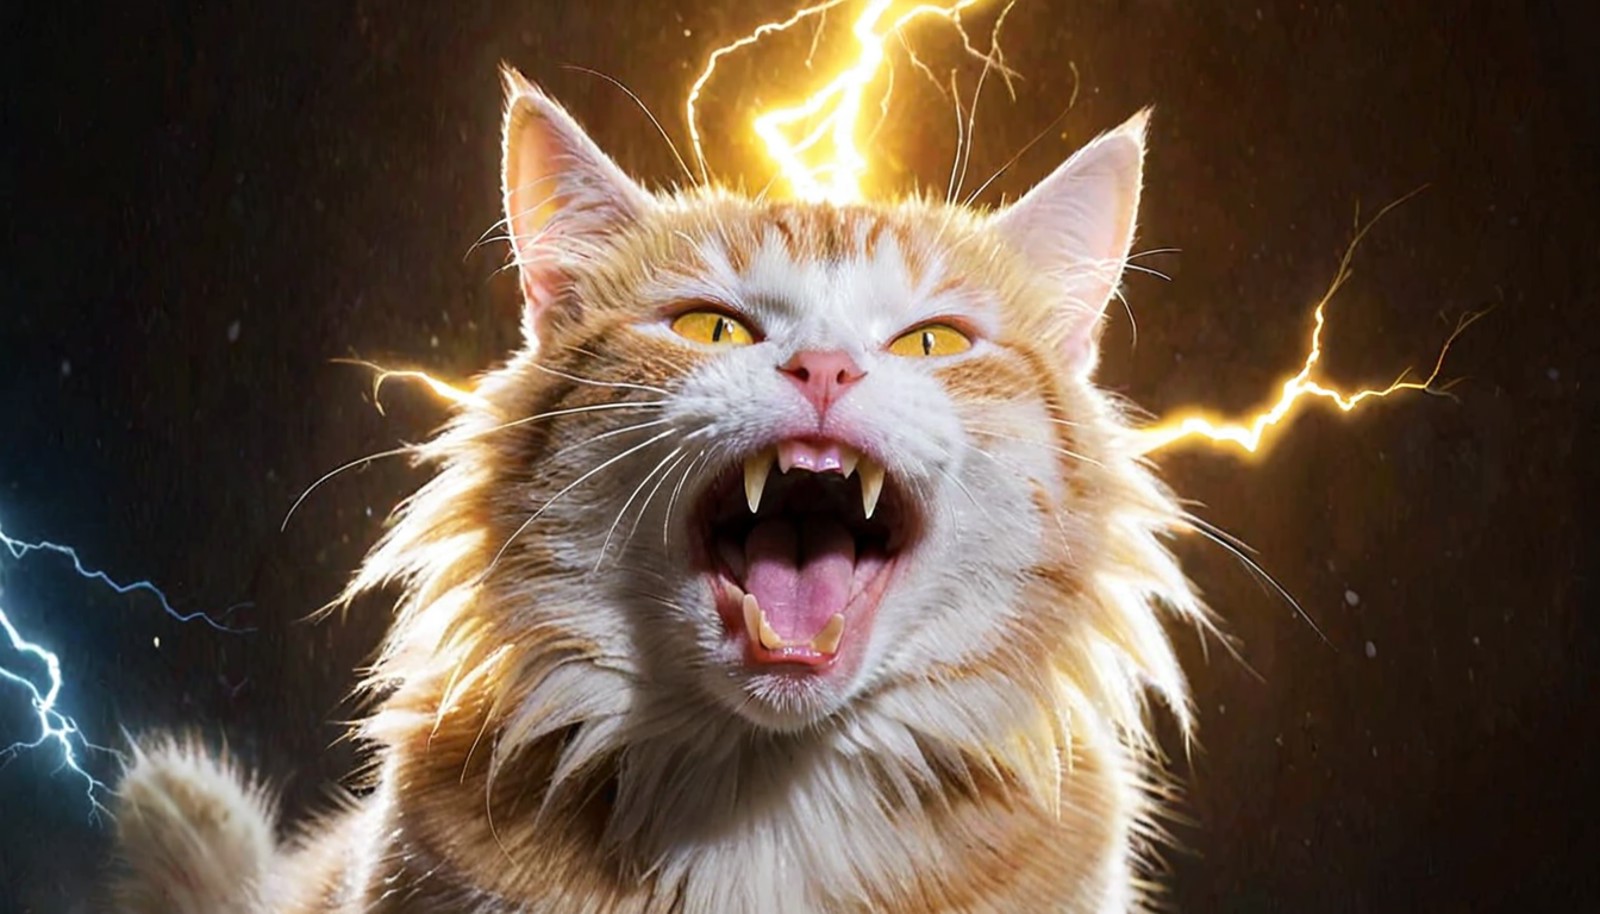 a masterpiece illustration of a cat becoming  super saiyan emitting golden aura and lightning charge, open mouth, angry,